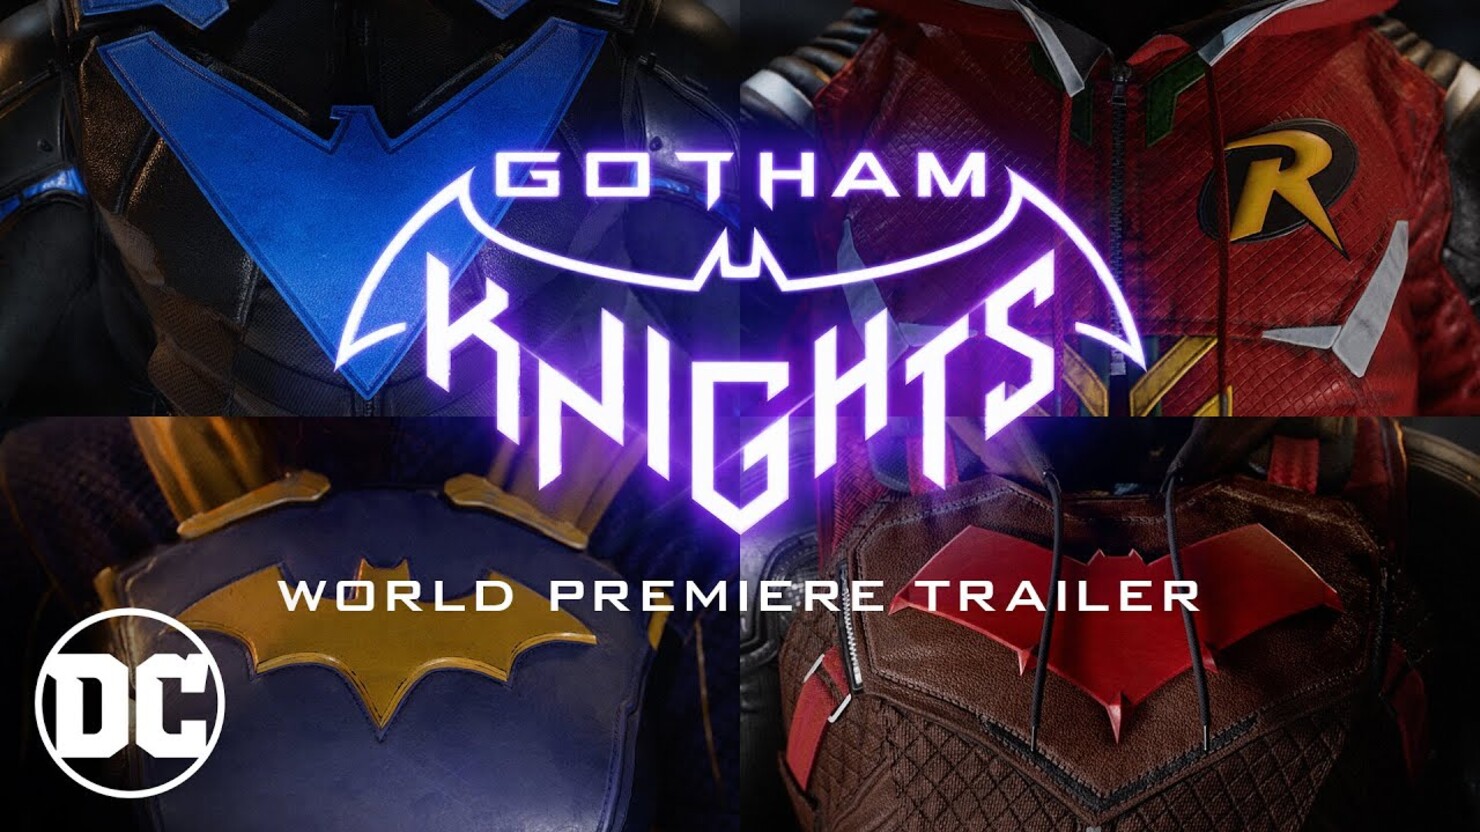 Knight ps5. Gotham Knights / Рыцари Готэма. Gotham Knights игра 2021. Batman Gotham Knights игра. Batman игра 2021.